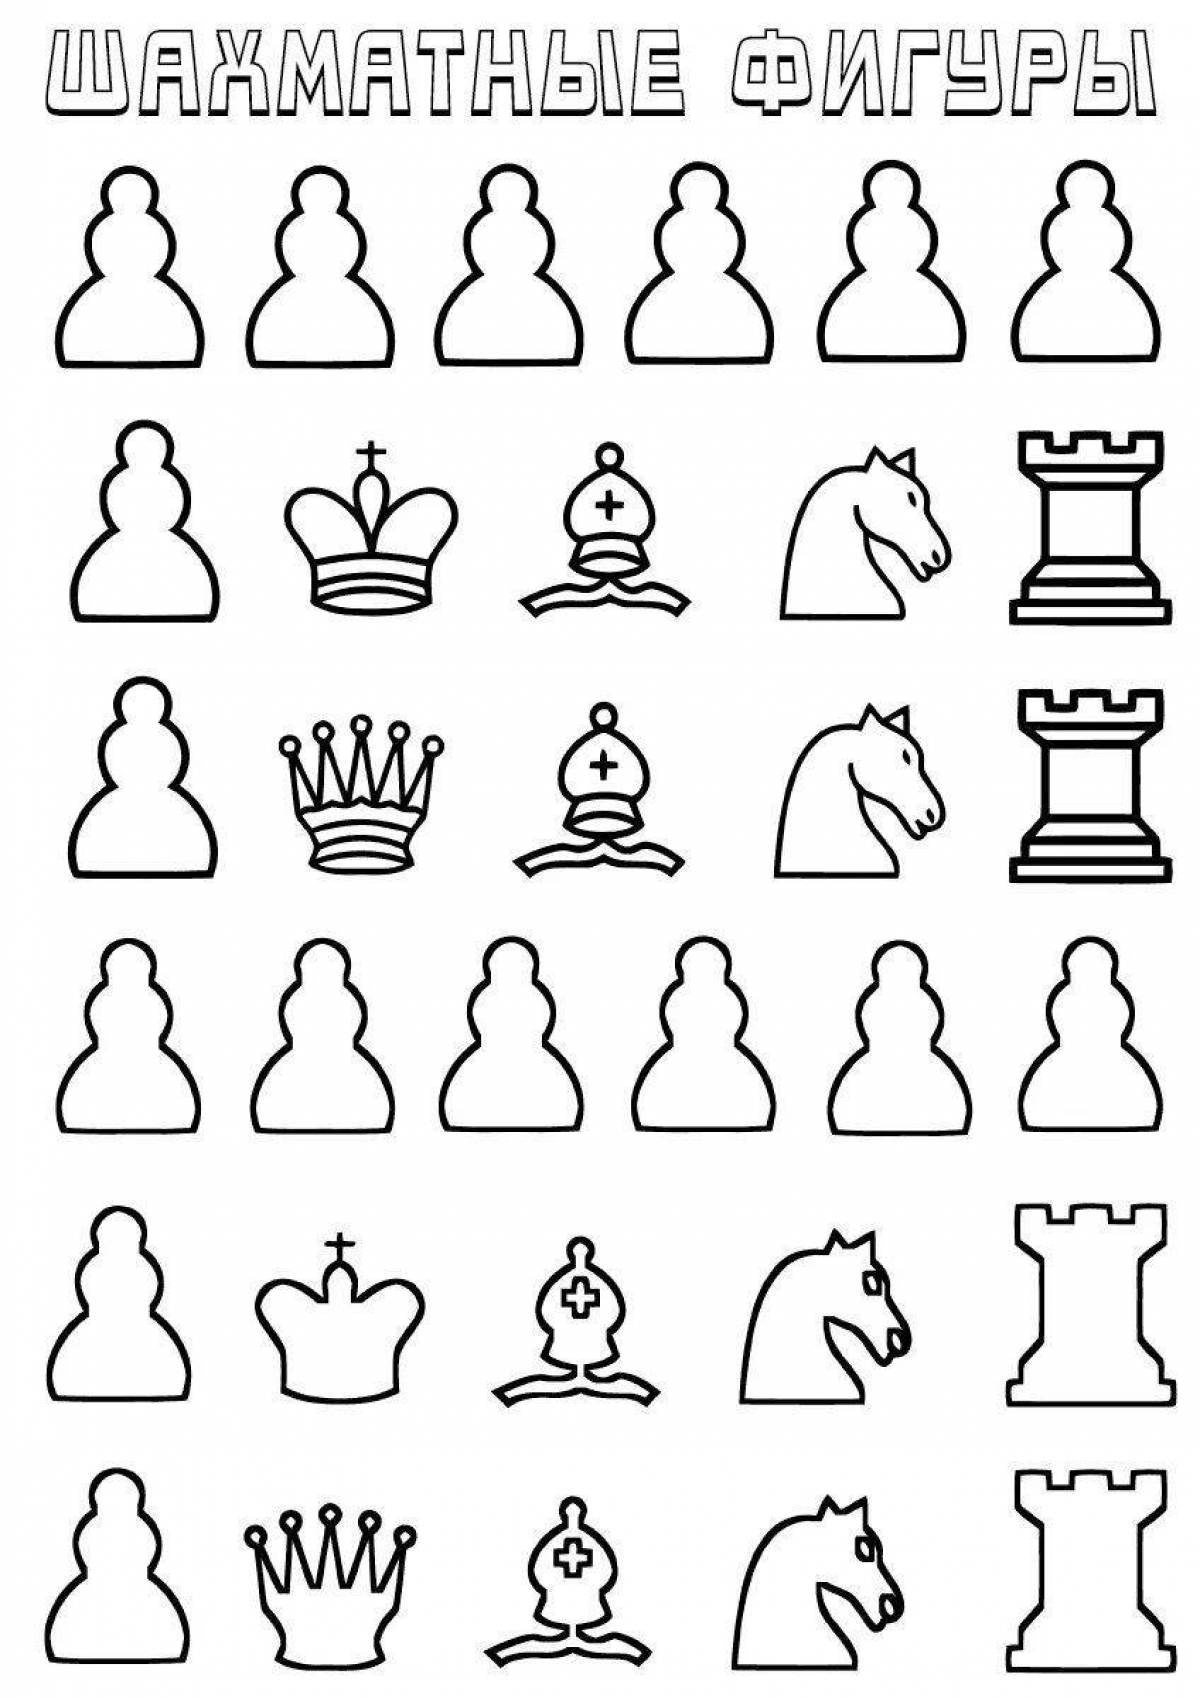 Exquisite chess pieces coloring book